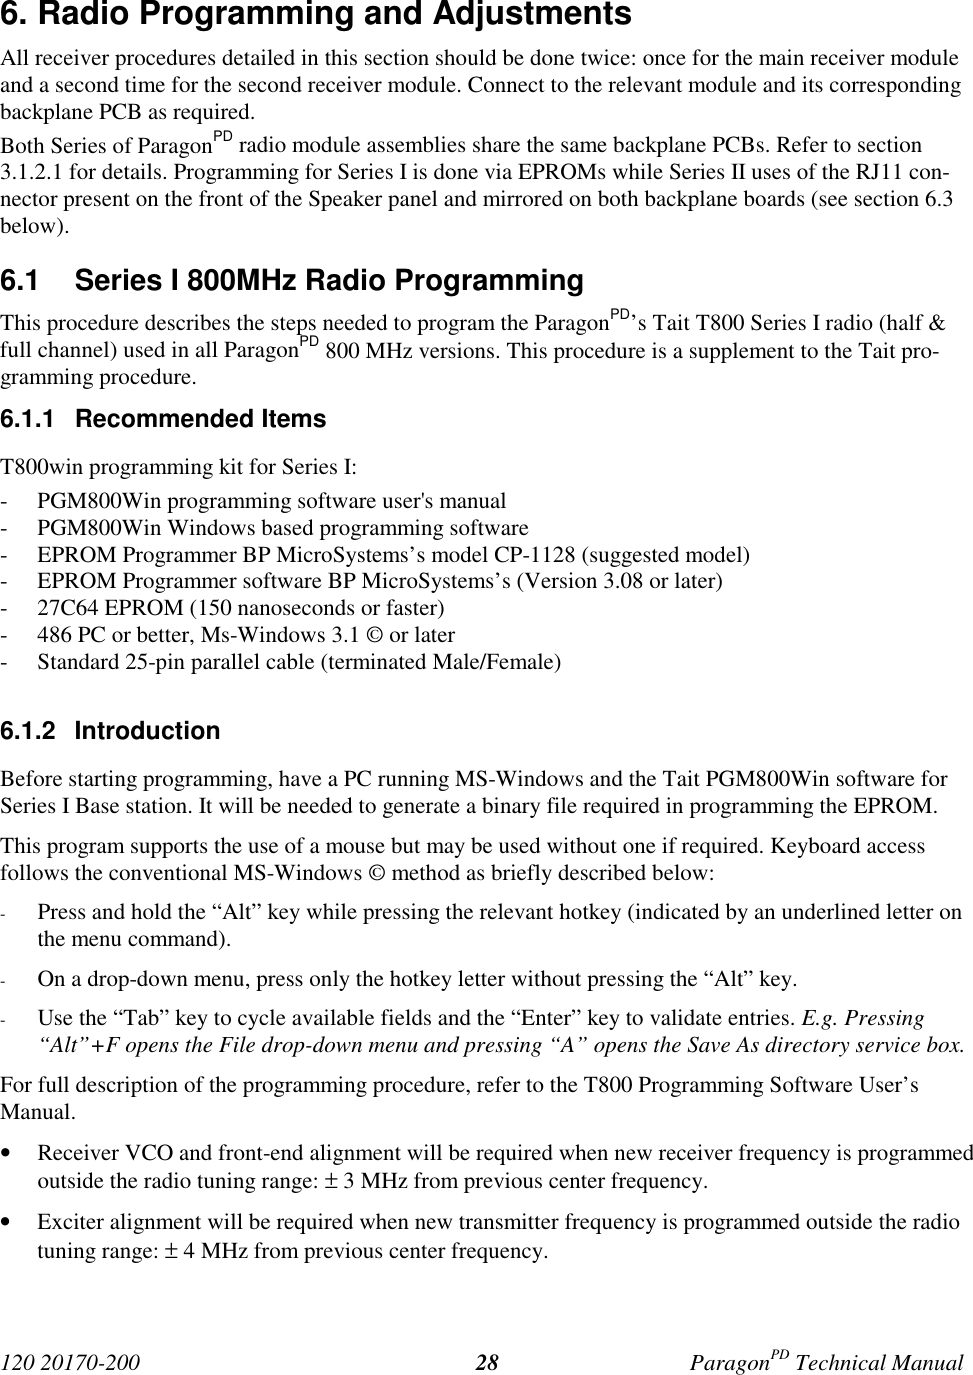 120 20170-200 ParagonPD Technical Manual286. Radio Programming and AdjustmentsAll receiver procedures detailed in this section should be done twice: once for the main receiver moduleand a second time for the second receiver module. Connect to the relevant module and its correspondingbackplane PCB as required.Both Series of ParagonPD radio module assemblies share the same backplane PCBs. Refer to section3.1.2.1 for details. Programming for Series I is done via EPROMs while Series II uses of the RJ11 con-nector present on the front of the Speaker panel and mirrored on both backplane boards (see section 6.3below).6.1  Series I 800MHz Radio ProgrammingThis procedure describes the steps needed to program the ParagonPD’s Tait T800 Series I radio (half &amp;full channel) used in all ParagonPD 800 MHz versions. This procedure is a supplement to the Tait pro-gramming procedure.6.1.1 Recommended ItemsT800win programming kit for Series I:- PGM800Win programming software user&apos;s manual- PGM800Win Windows based programming software- EPROM Programmer BP MicroSystems’s model CP-1128 (suggested model)- EPROM Programmer software BP MicroSystems’s (Version 3.08 or later)- 27C64 EPROM (150 nanoseconds or faster)- 486 PC or better, Ms-Windows 3.1 © or later- Standard 25-pin parallel cable (terminated Male/Female)6.1.2 IntroductionBefore starting programming, have a PC running MS-Windows and the Tait PGM800Win software forSeries I Base station. It will be needed to generate a binary file required in programming the EPROM.This program supports the use of a mouse but may be used without one if required. Keyboard accessfollows the conventional MS-Windows © method as briefly described below:- Press and hold the “Alt” key while pressing the relevant hotkey (indicated by an underlined letter onthe menu command).- On a drop-down menu, press only the hotkey letter without pressing the “Alt” key.- Use the “Tab” key to cycle available fields and the “Enter” key to validate entries. E.g. Pressing“Alt”+F opens the File drop-down menu and pressing “A” opens the Save As directory service box.For full description of the programming procedure, refer to the T800 Programming Software User’sManual.• Receiver VCO and front-end alignment will be required when new receiver frequency is programmedoutside the radio tuning range: ± 3 MHz from previous center frequency.• Exciter alignment will be required when new transmitter frequency is programmed outside the radiotuning range: ± 4 MHz from previous center frequency.